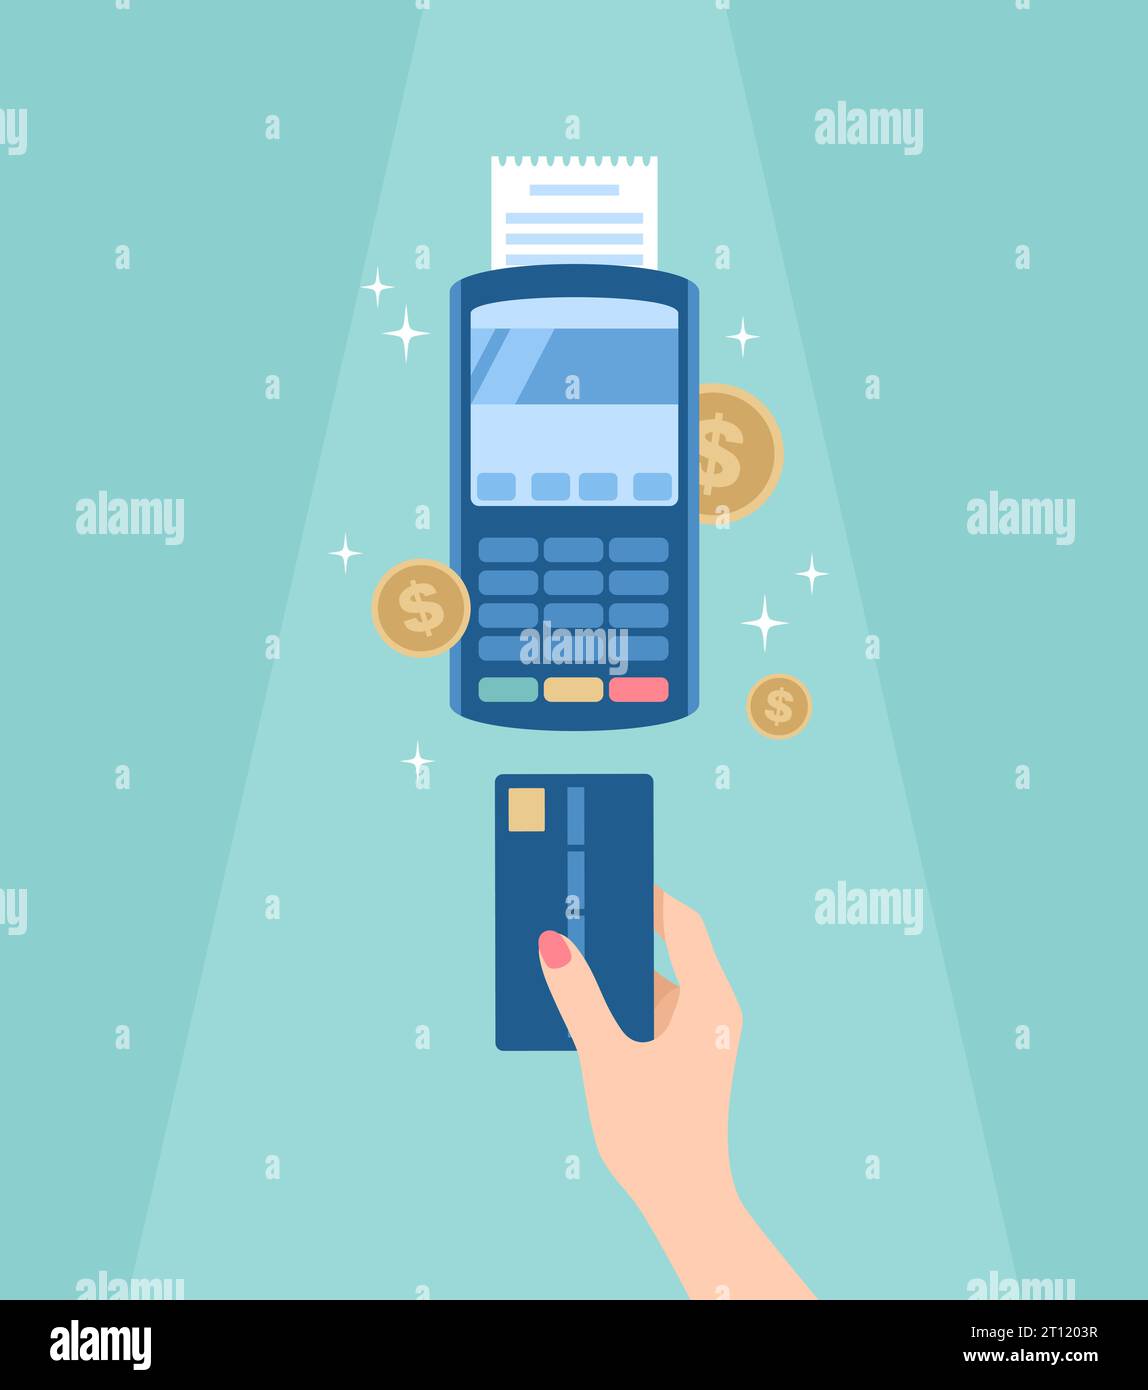 POS terminal and hand with credit card. Cashless contactless payment. Flat vector illustration Stock Vector